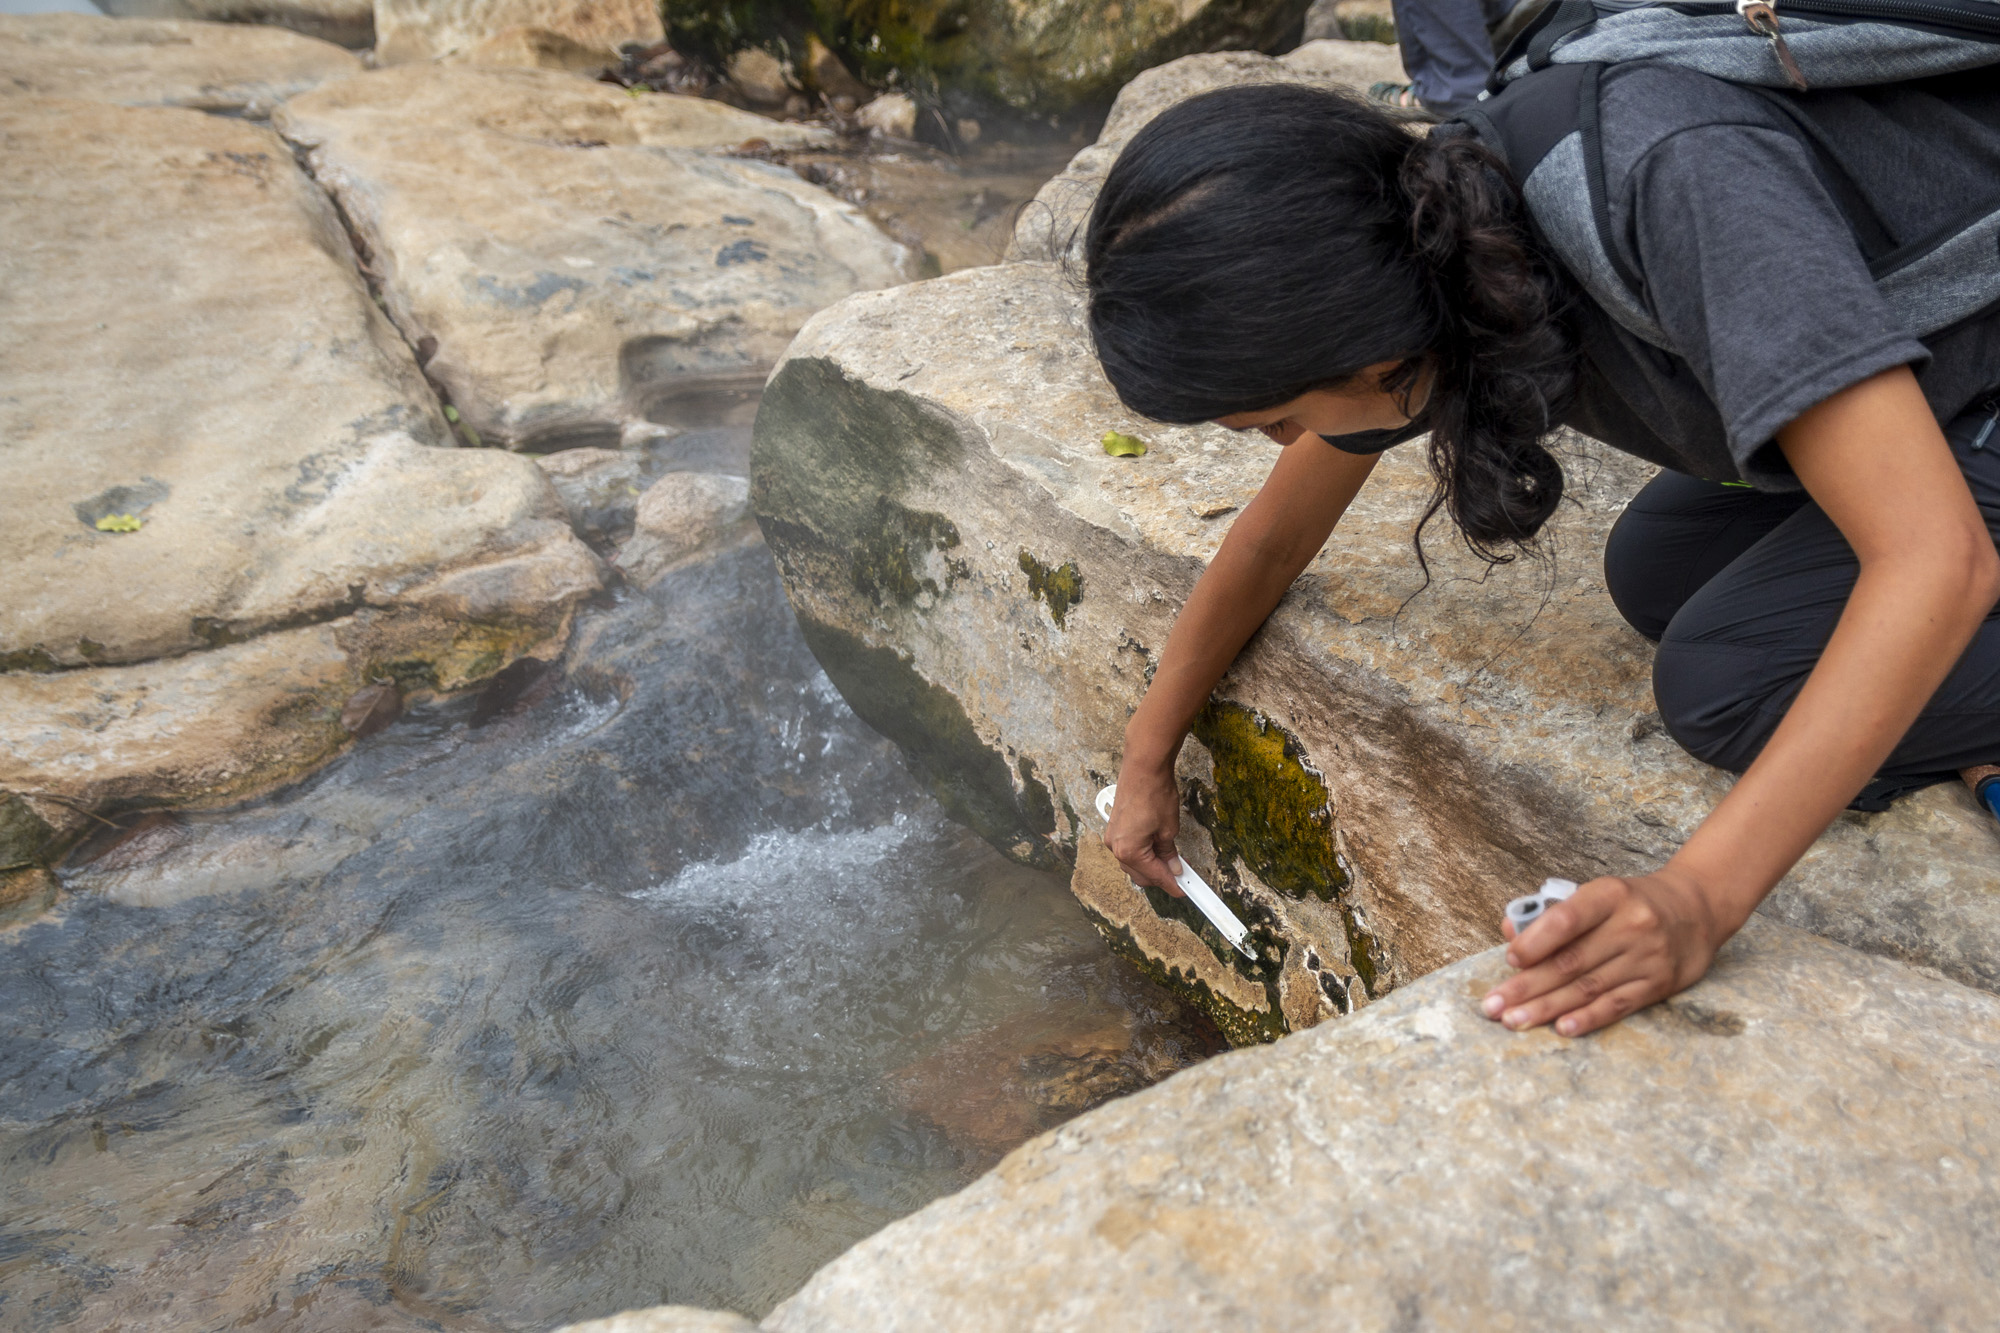 Rosa Vasquez collects samples from the Boiling River